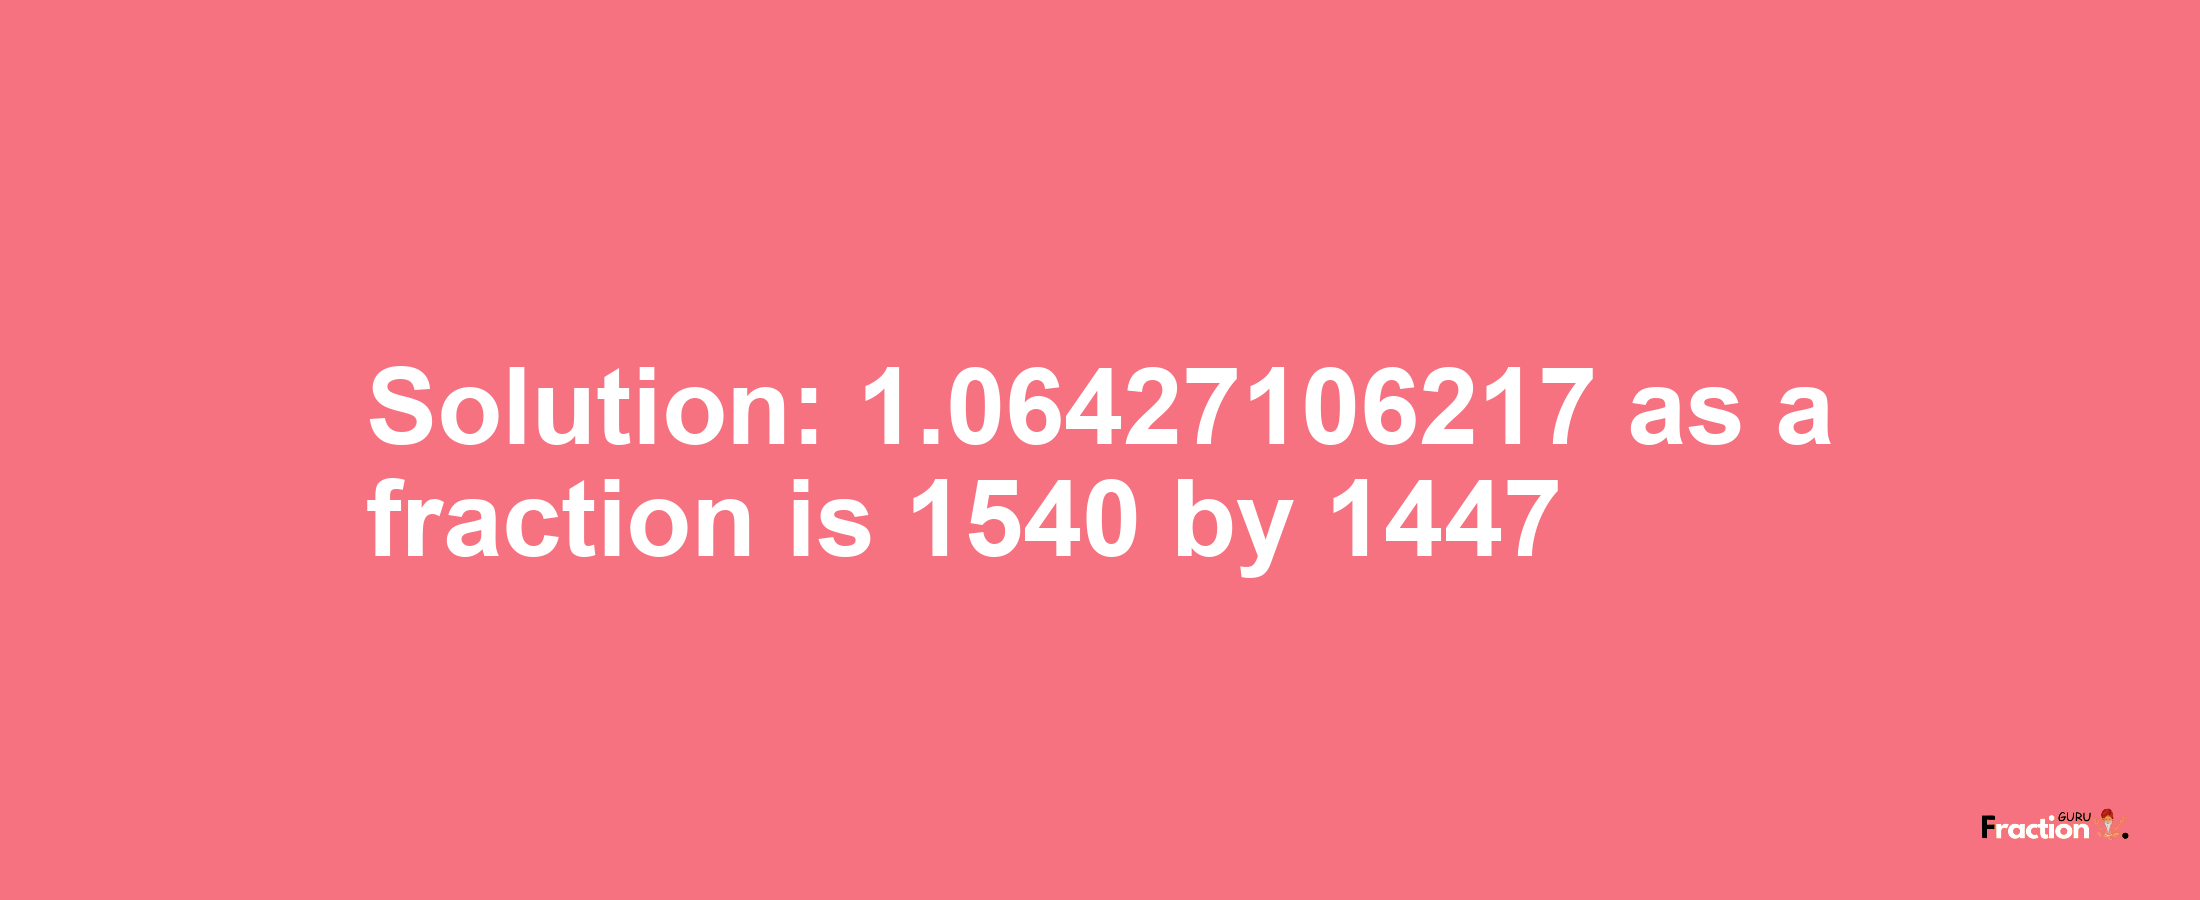 Solution:1.06427106217 as a fraction is 1540/1447